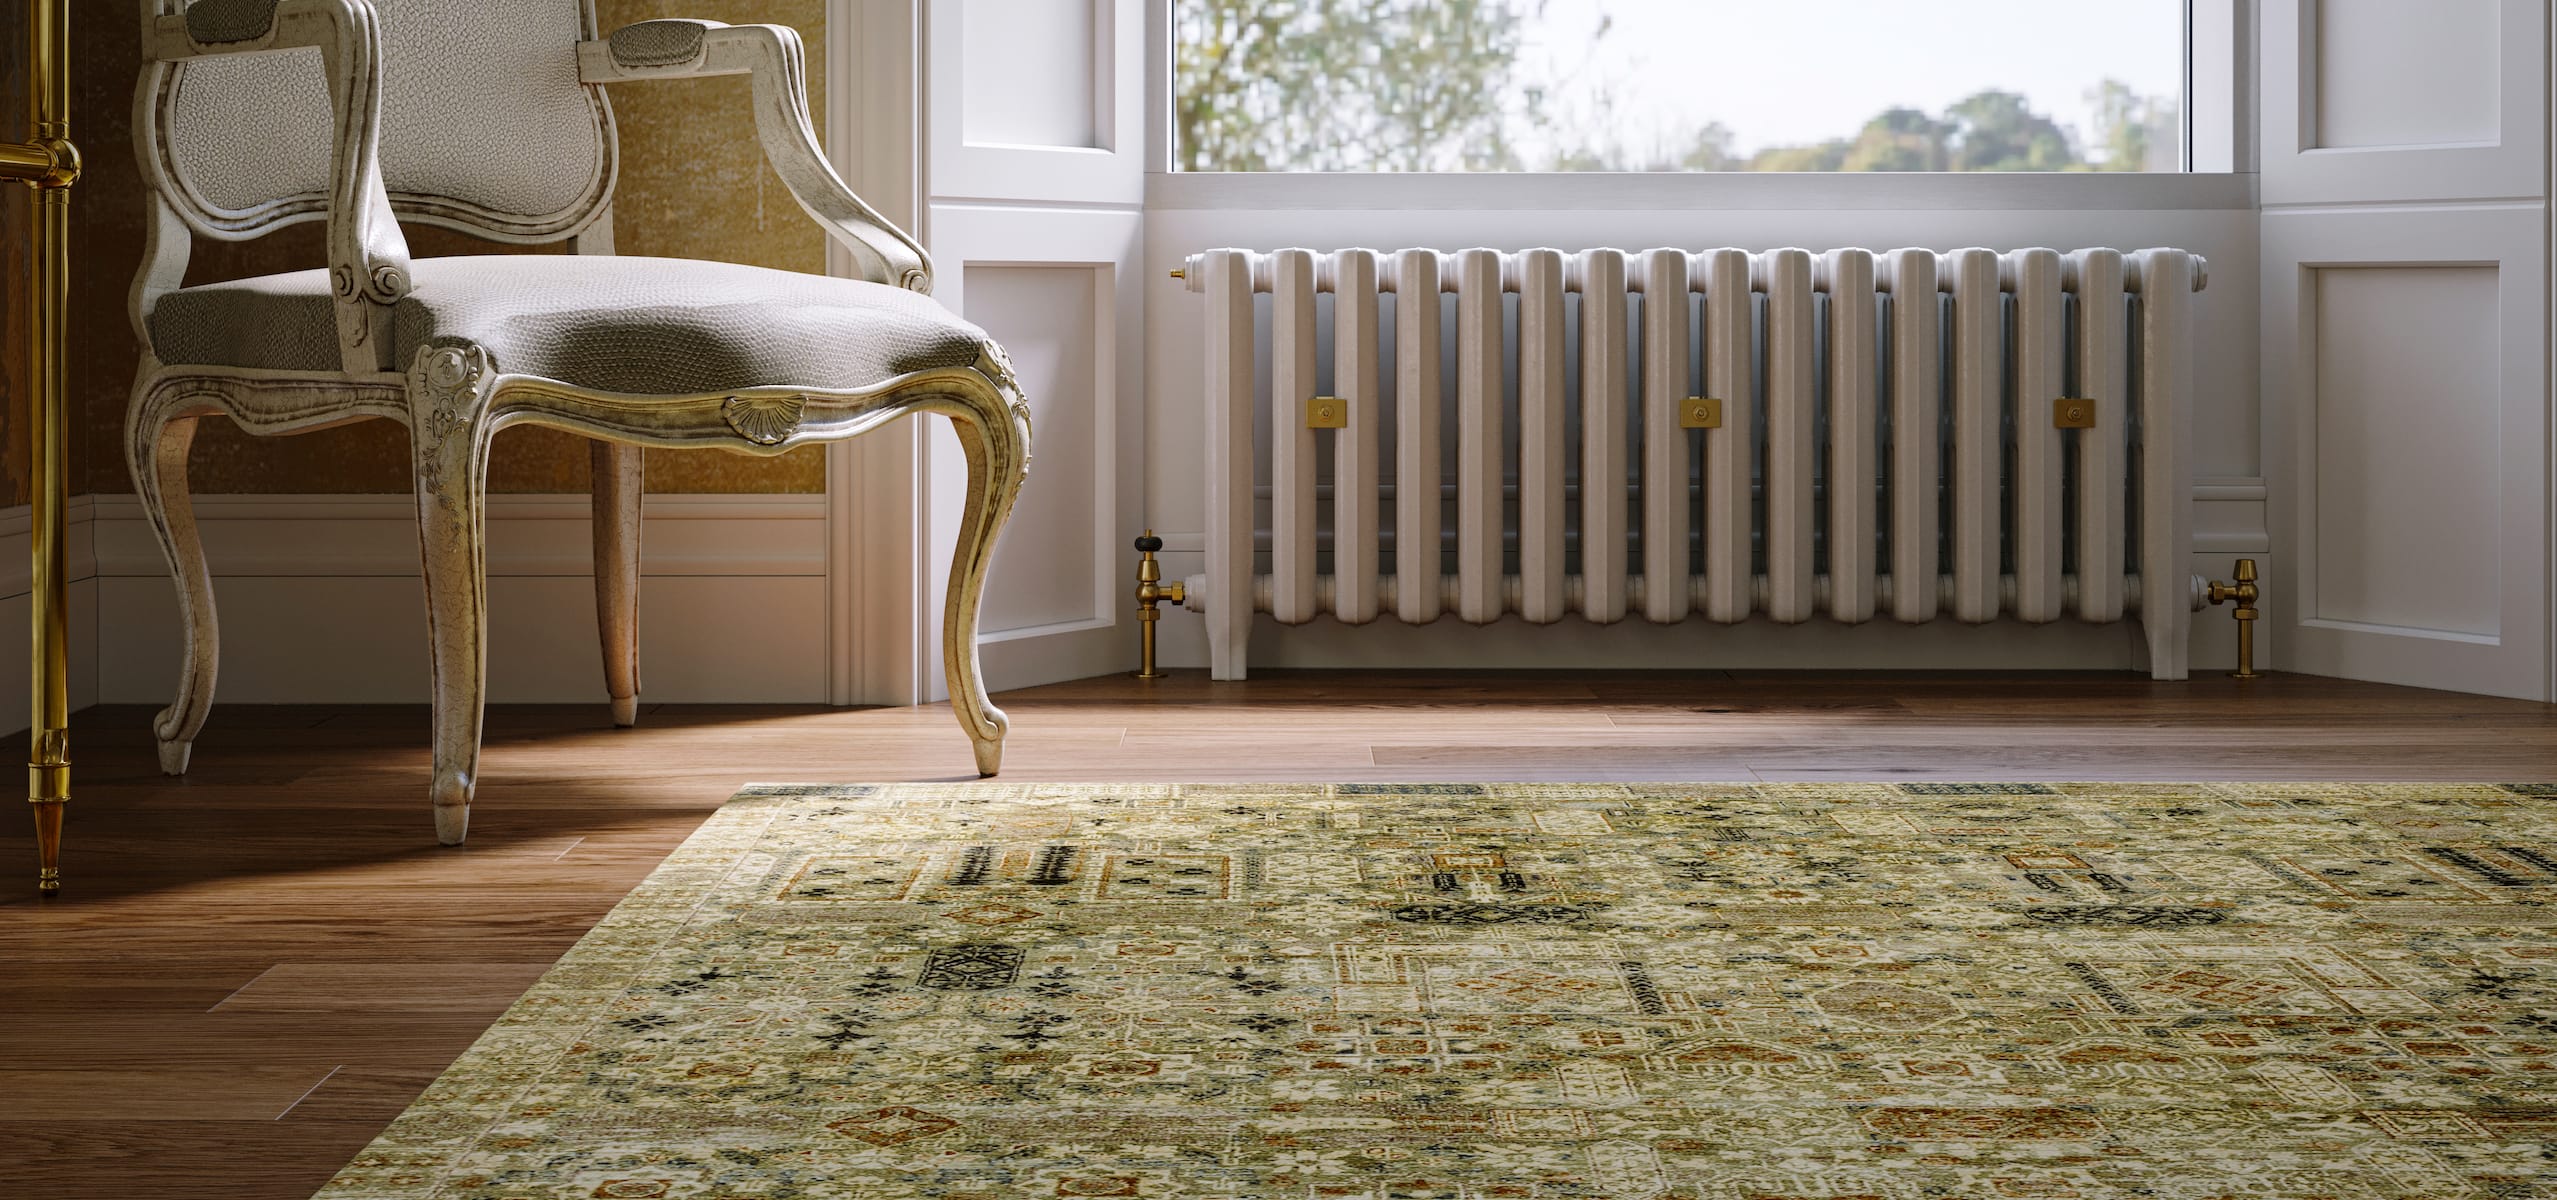 Why Are Rugs So Expensive? 